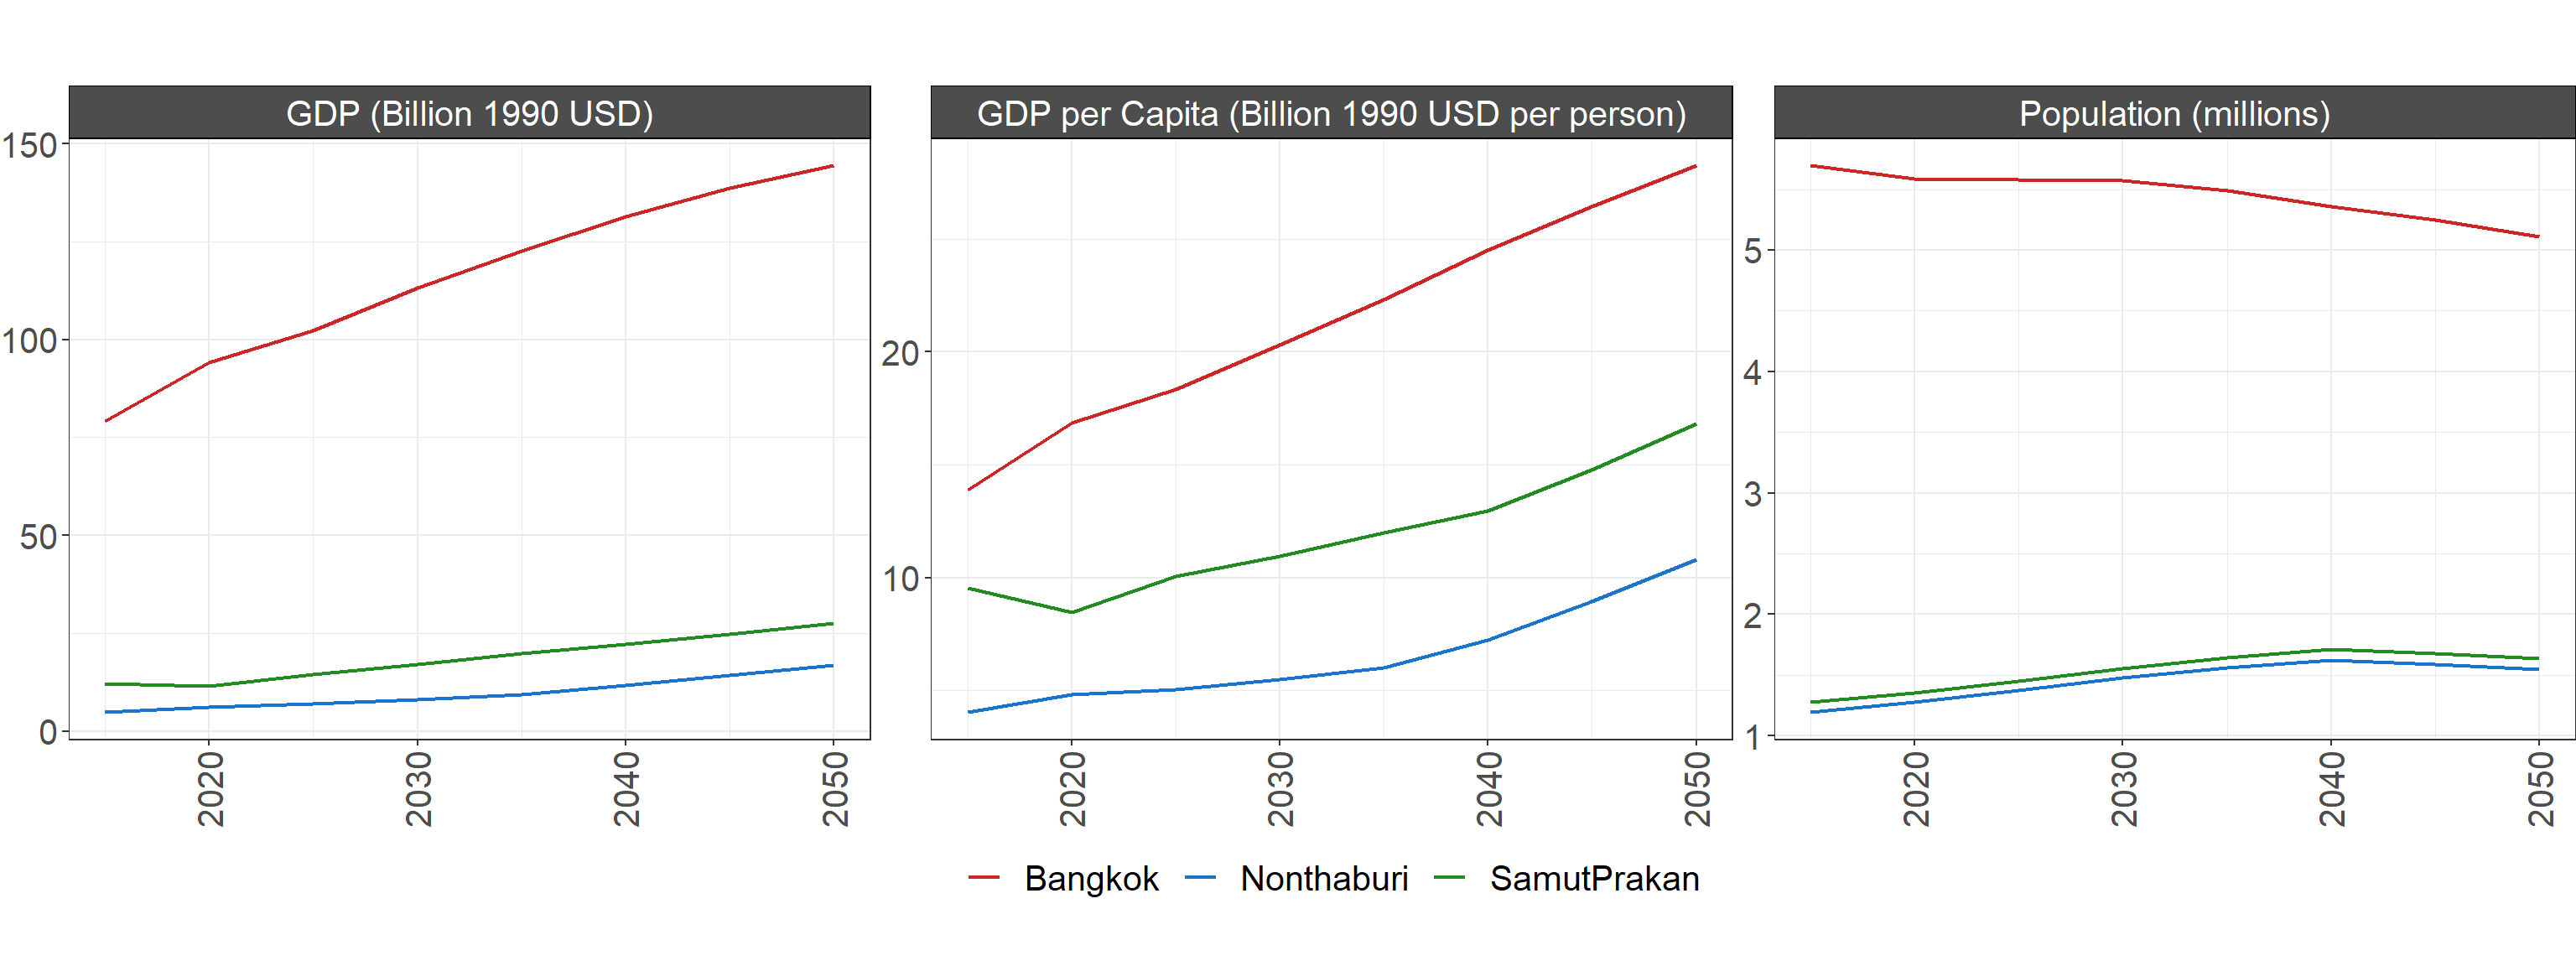 GDP, per capita GDP, and population in the MEA area from 2020 to 2065. Only the BAU scenario is shown since socioeconomic assumptions are consistent between scenarios.